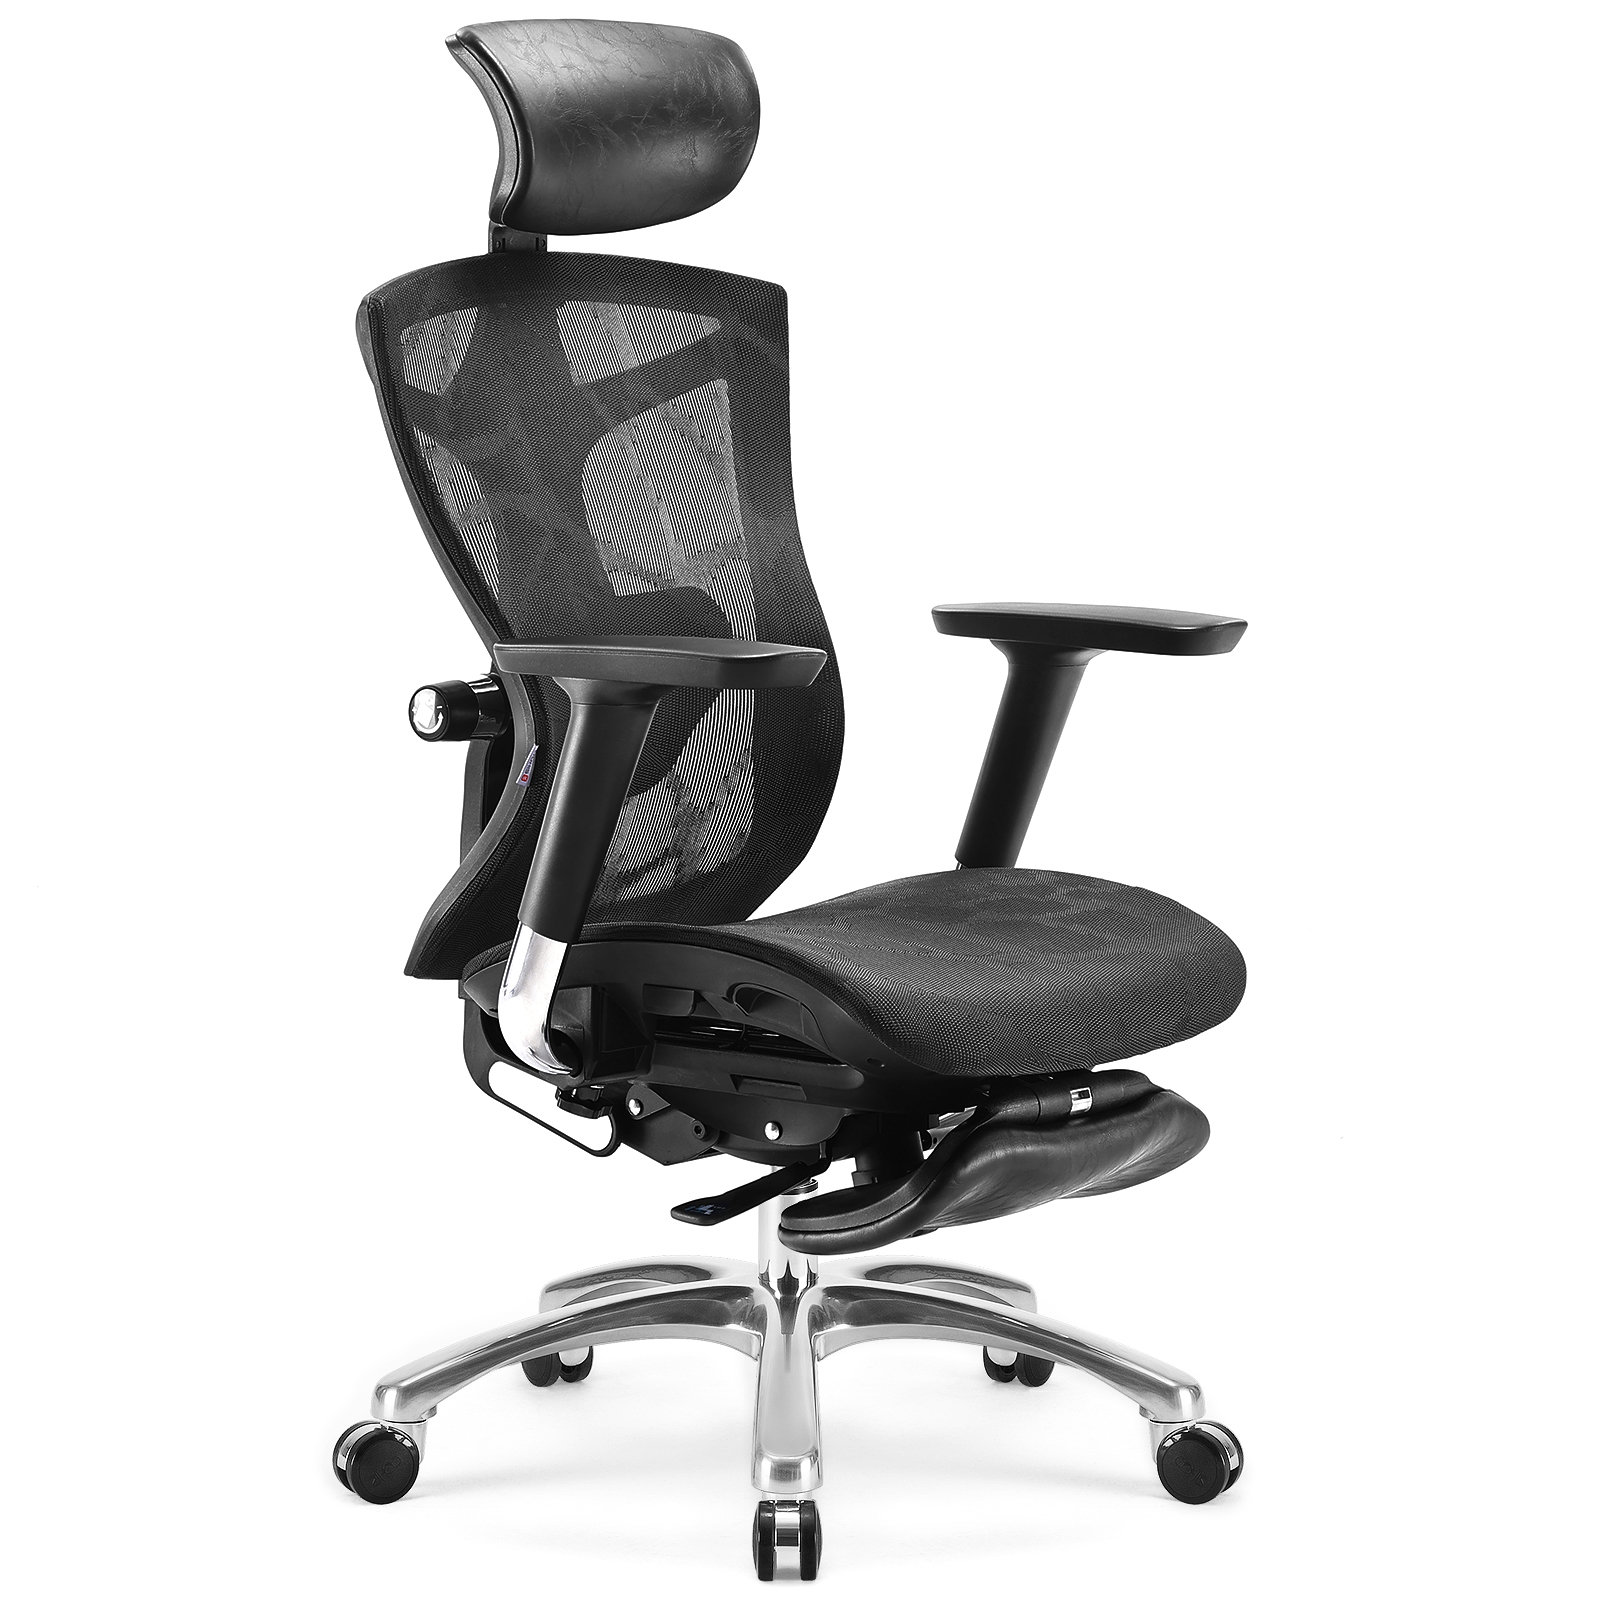 Inbox Zero Armless Office Chair Low Back Desk Chair with Lumbar Support,  Adjustable Height for Small Space & Reviews